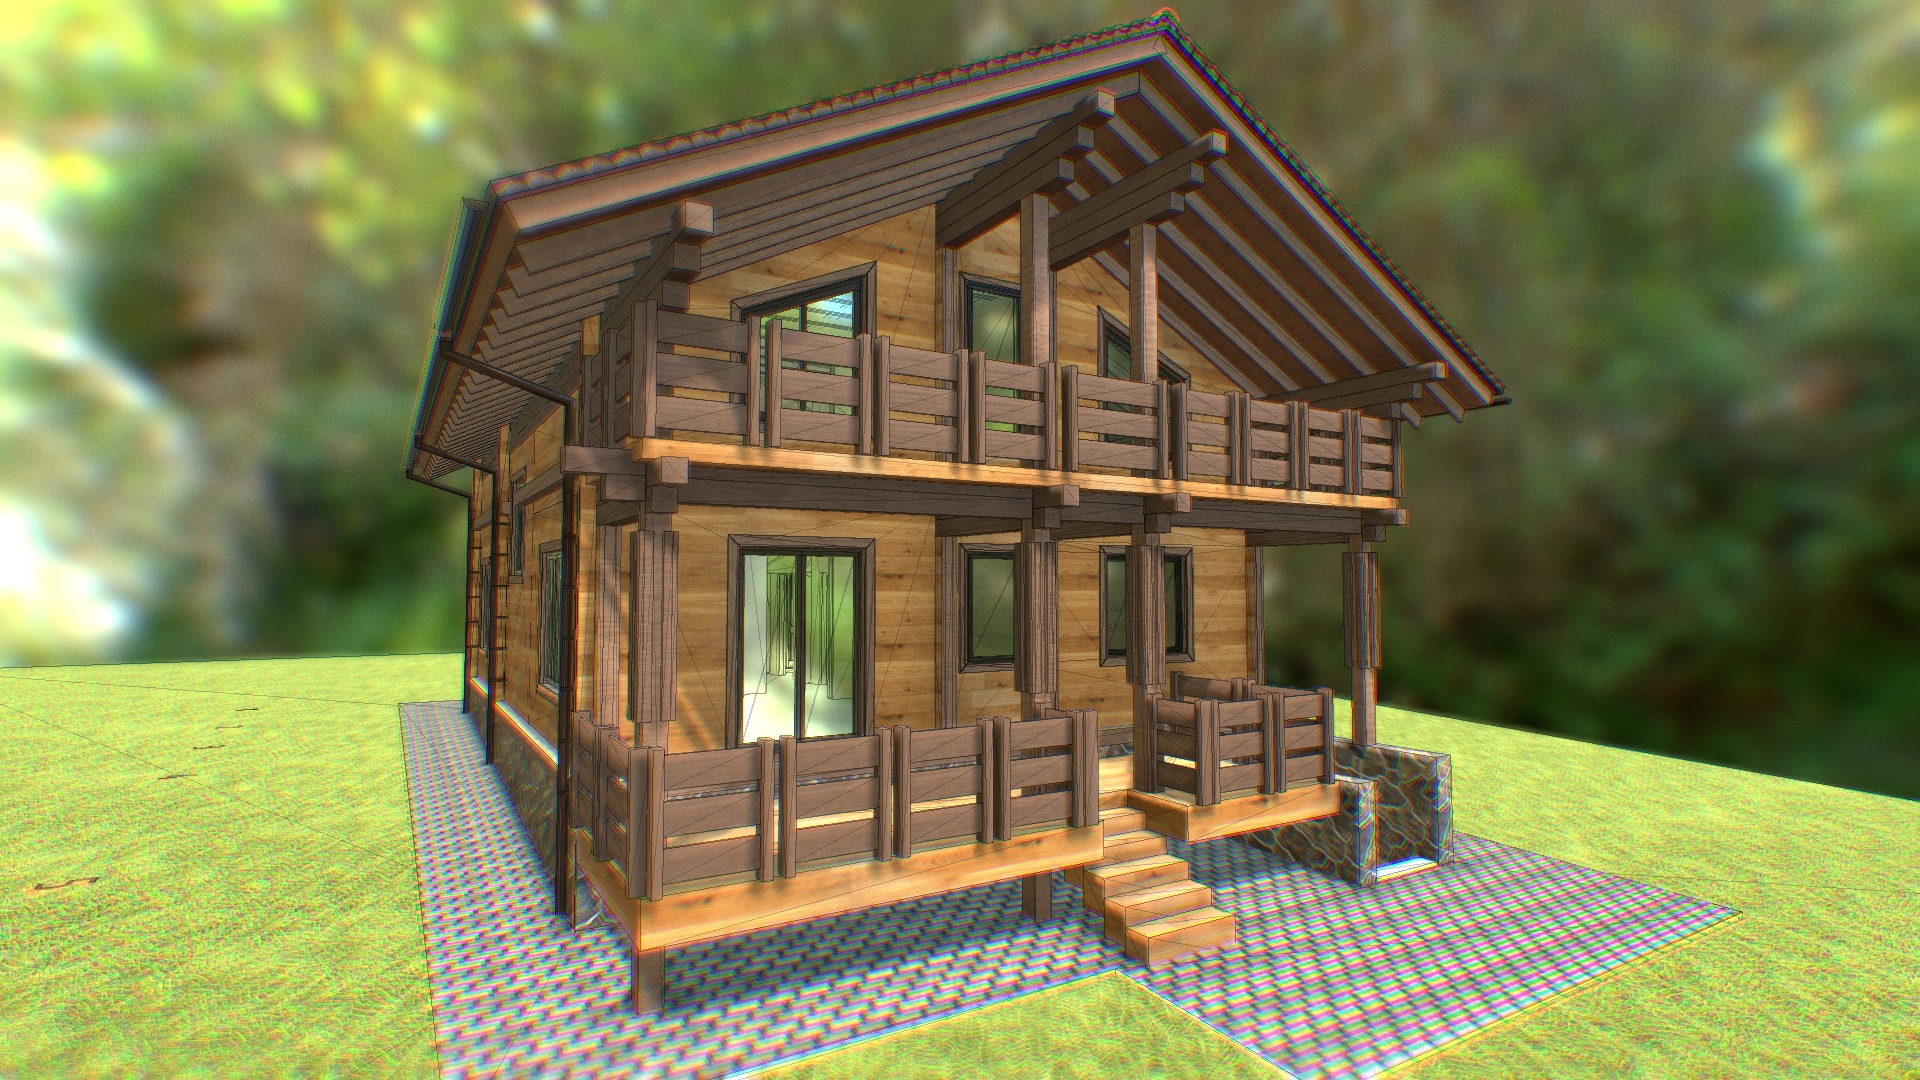 3D model Toxovo sketch - This is a 3D model of the Toxovo sketch. The 3D model is about a wood house in a forest.